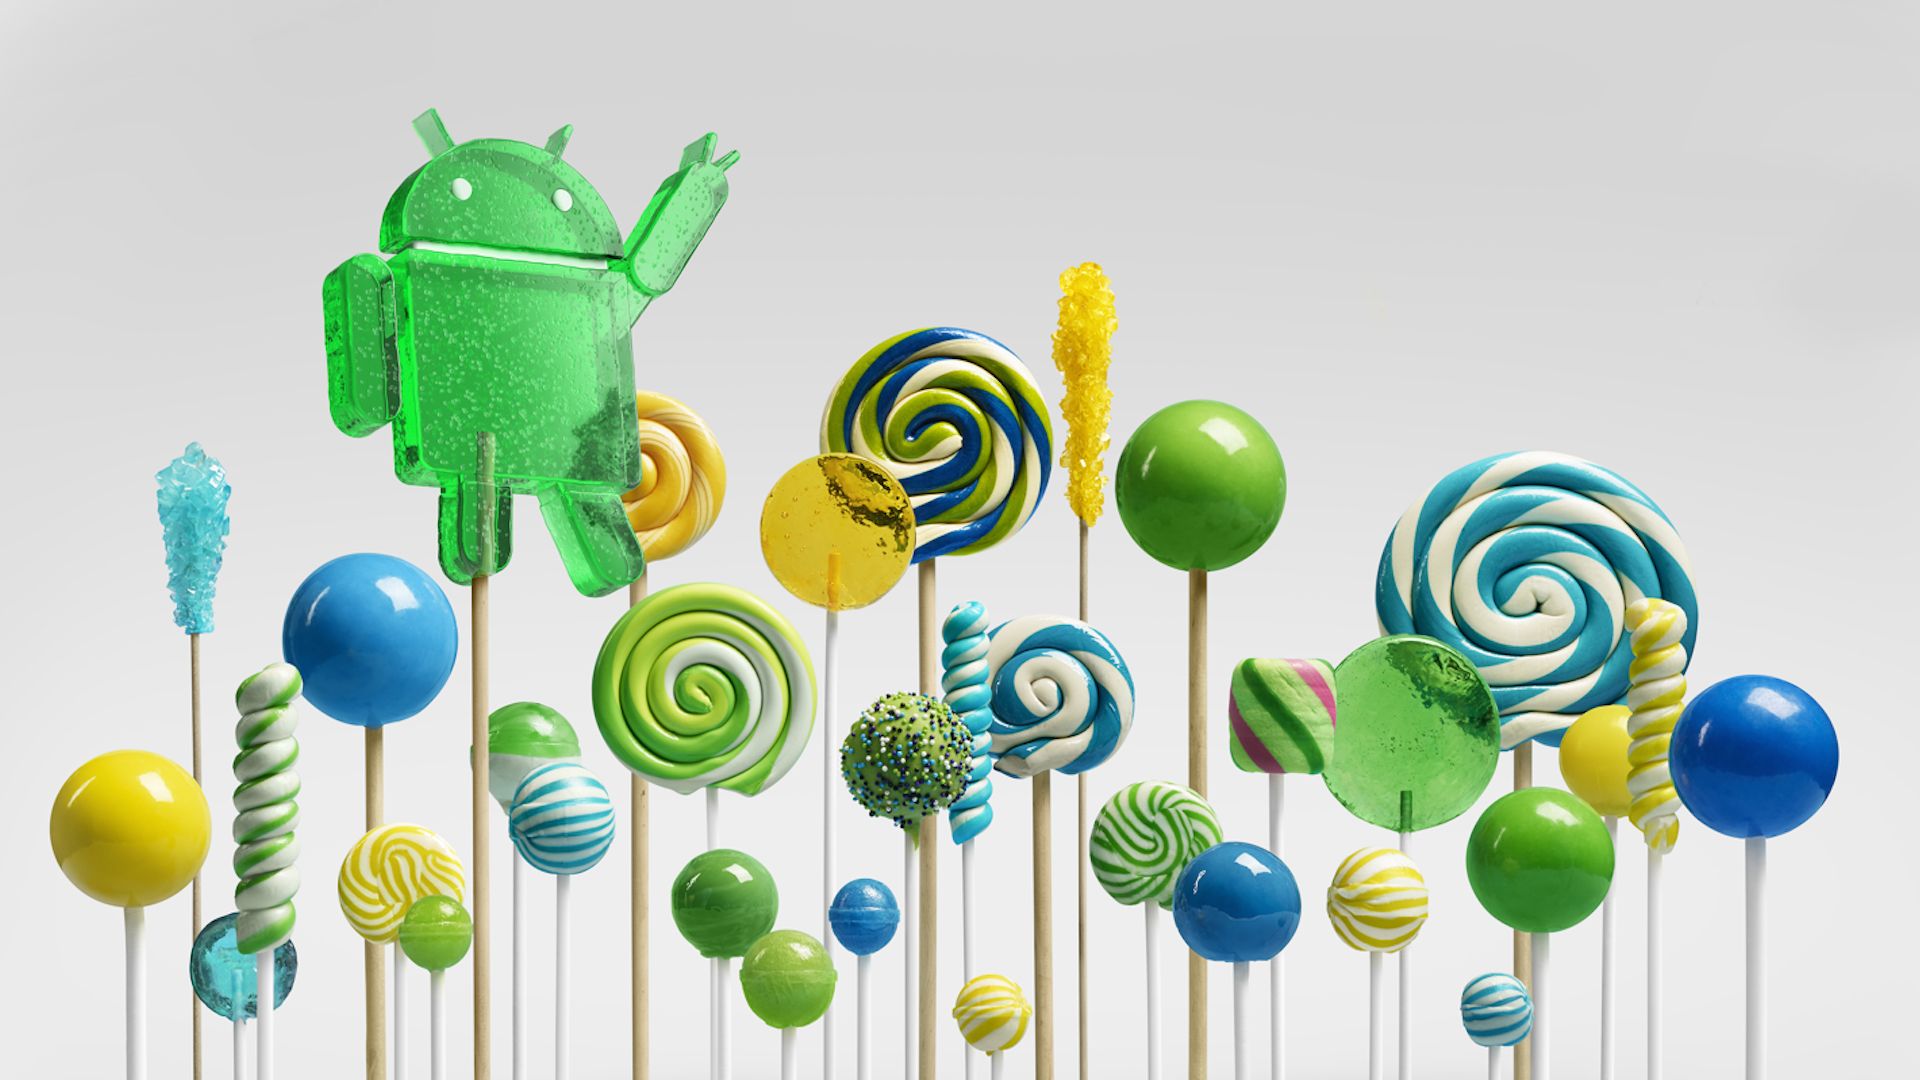 Weekly Wallpaper: Celebrate Android L With These Lollipop Wallpaper